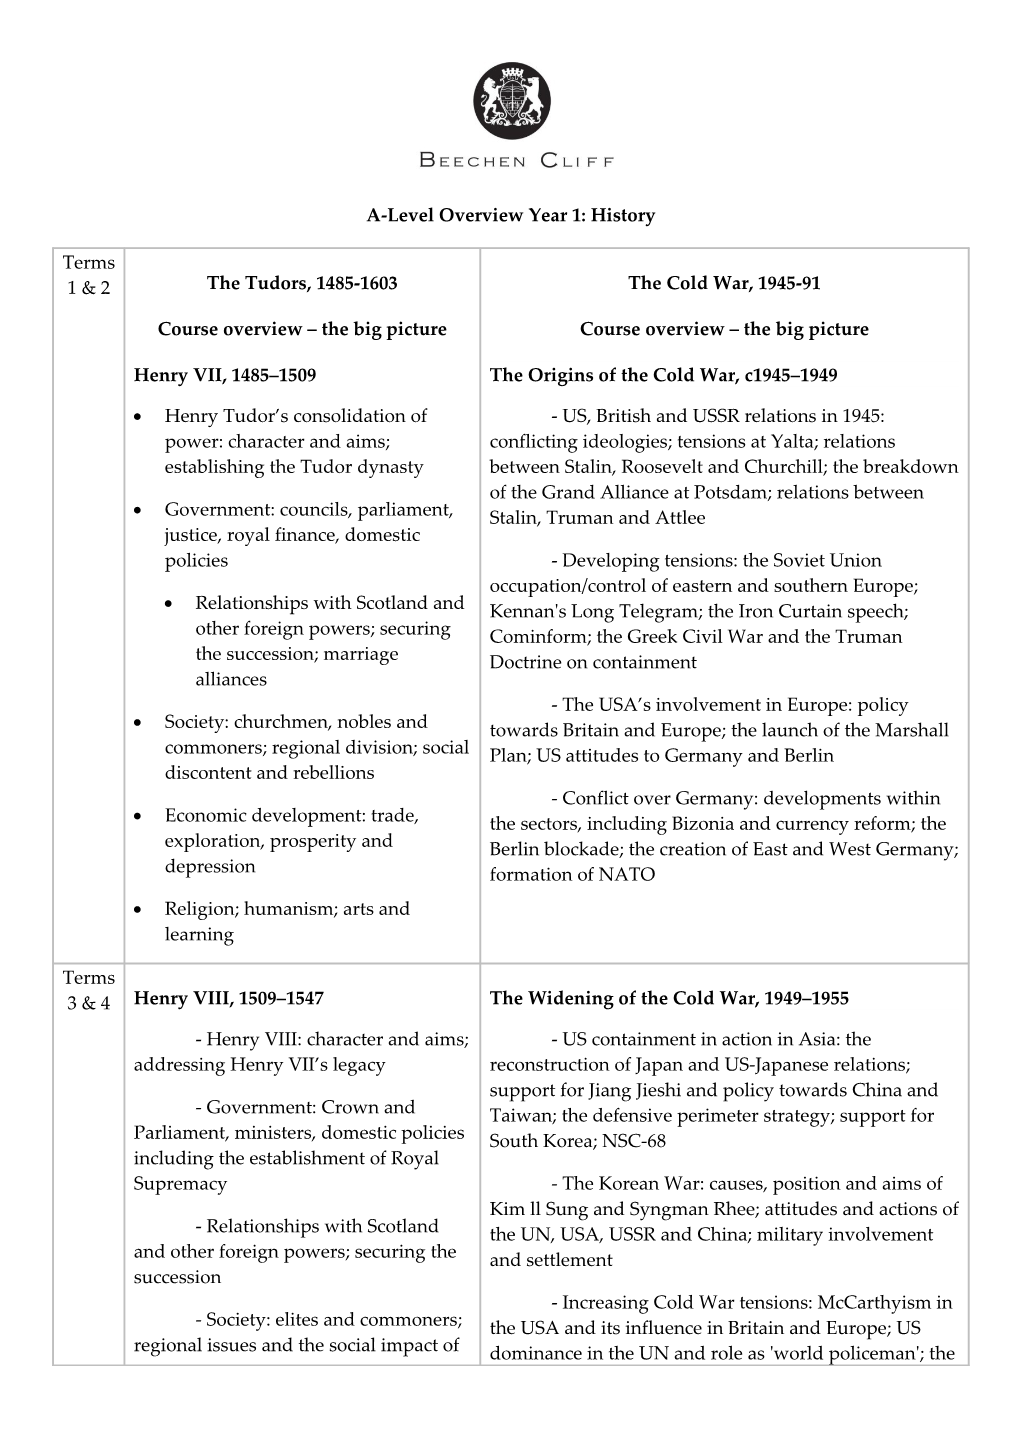 A-Level Overview Year 1: History